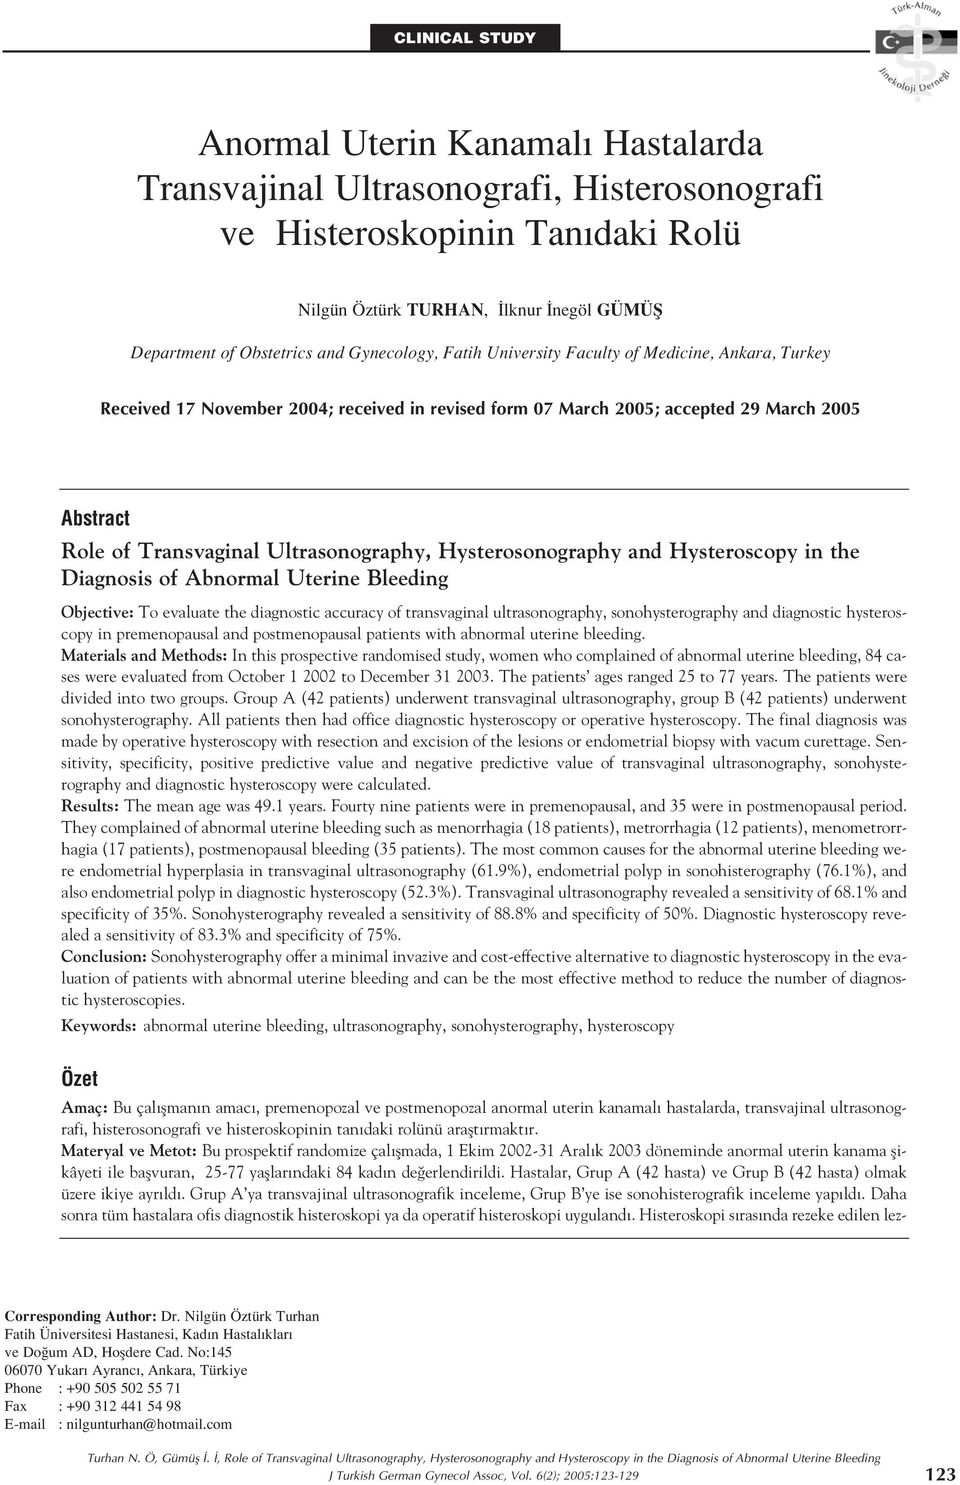 Ultrasonography, Hysterosonography and Hysteroscopy in the Diagnosis of Abnormal Uterine Bleeding Objective: To evaluate the diagnostic accuracy of transvaginal ultrasonography, sonohysterography and